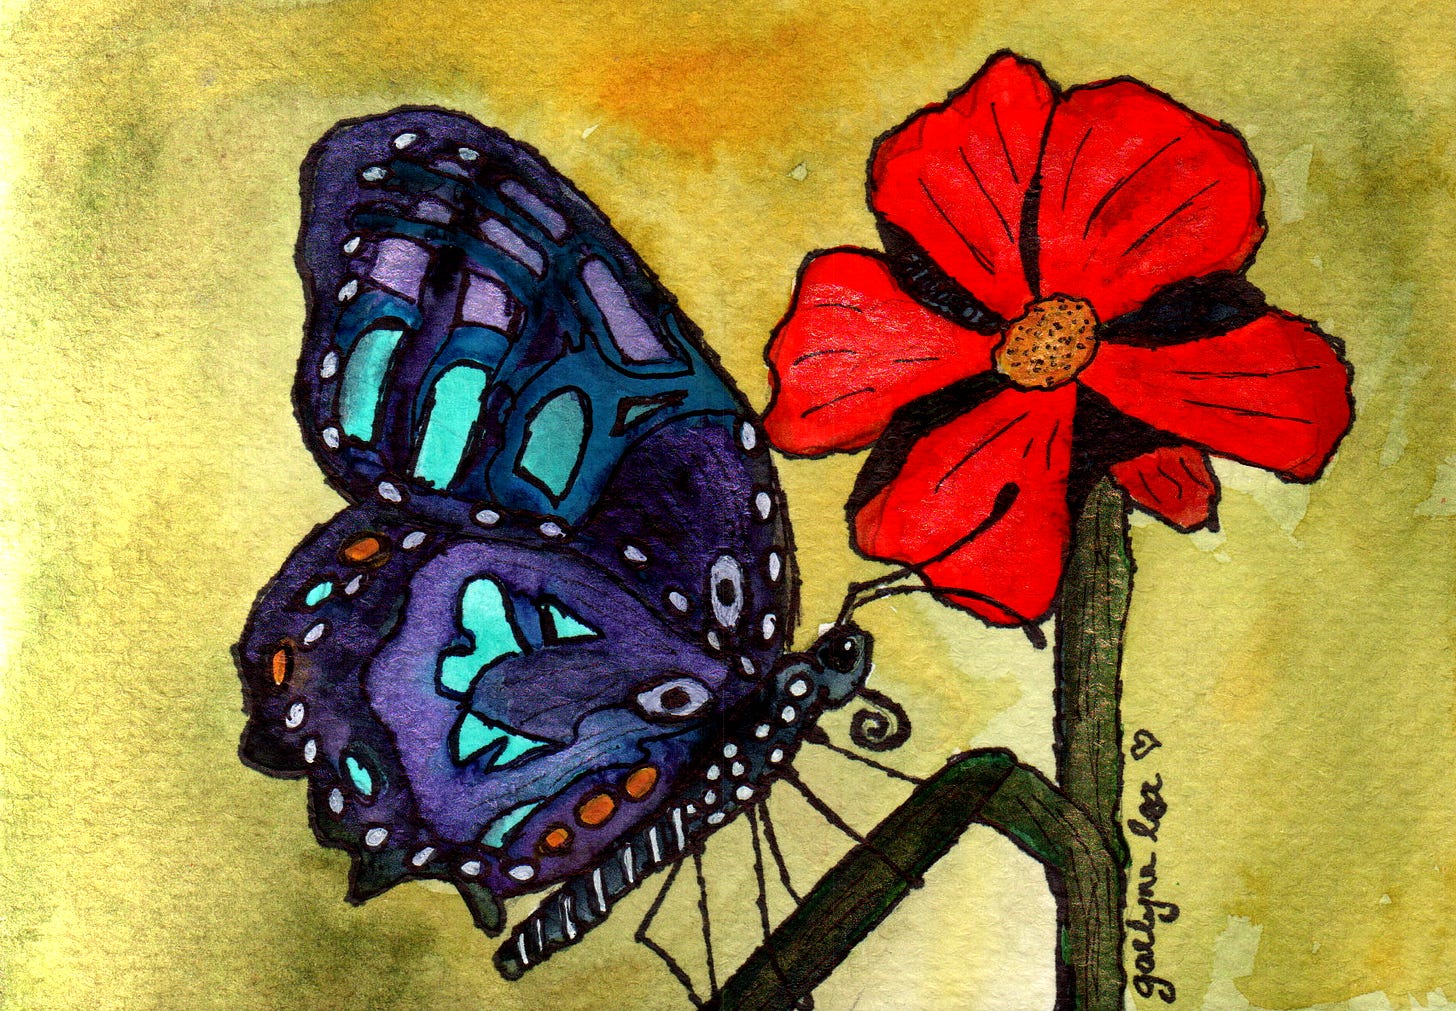 This is a watercolor painting by Gaelynn that depicts a purple and blue butterfly resting on a leaf of a bright red flower. The background is a washy green.